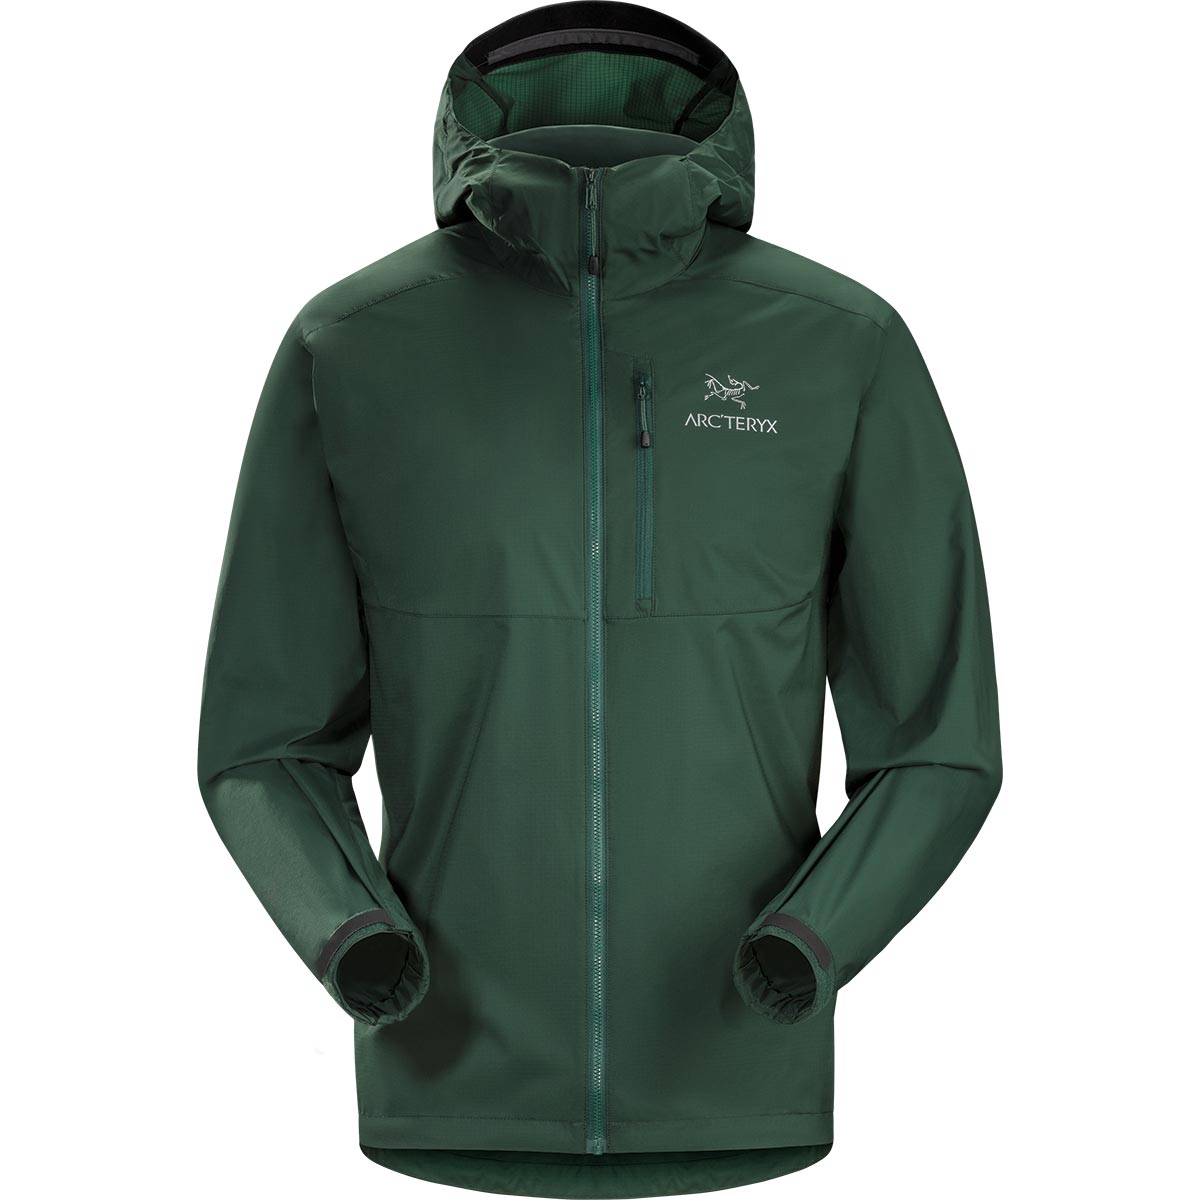 Arc'teryx Squamish Hoody, men's, discontinued colors (free ground